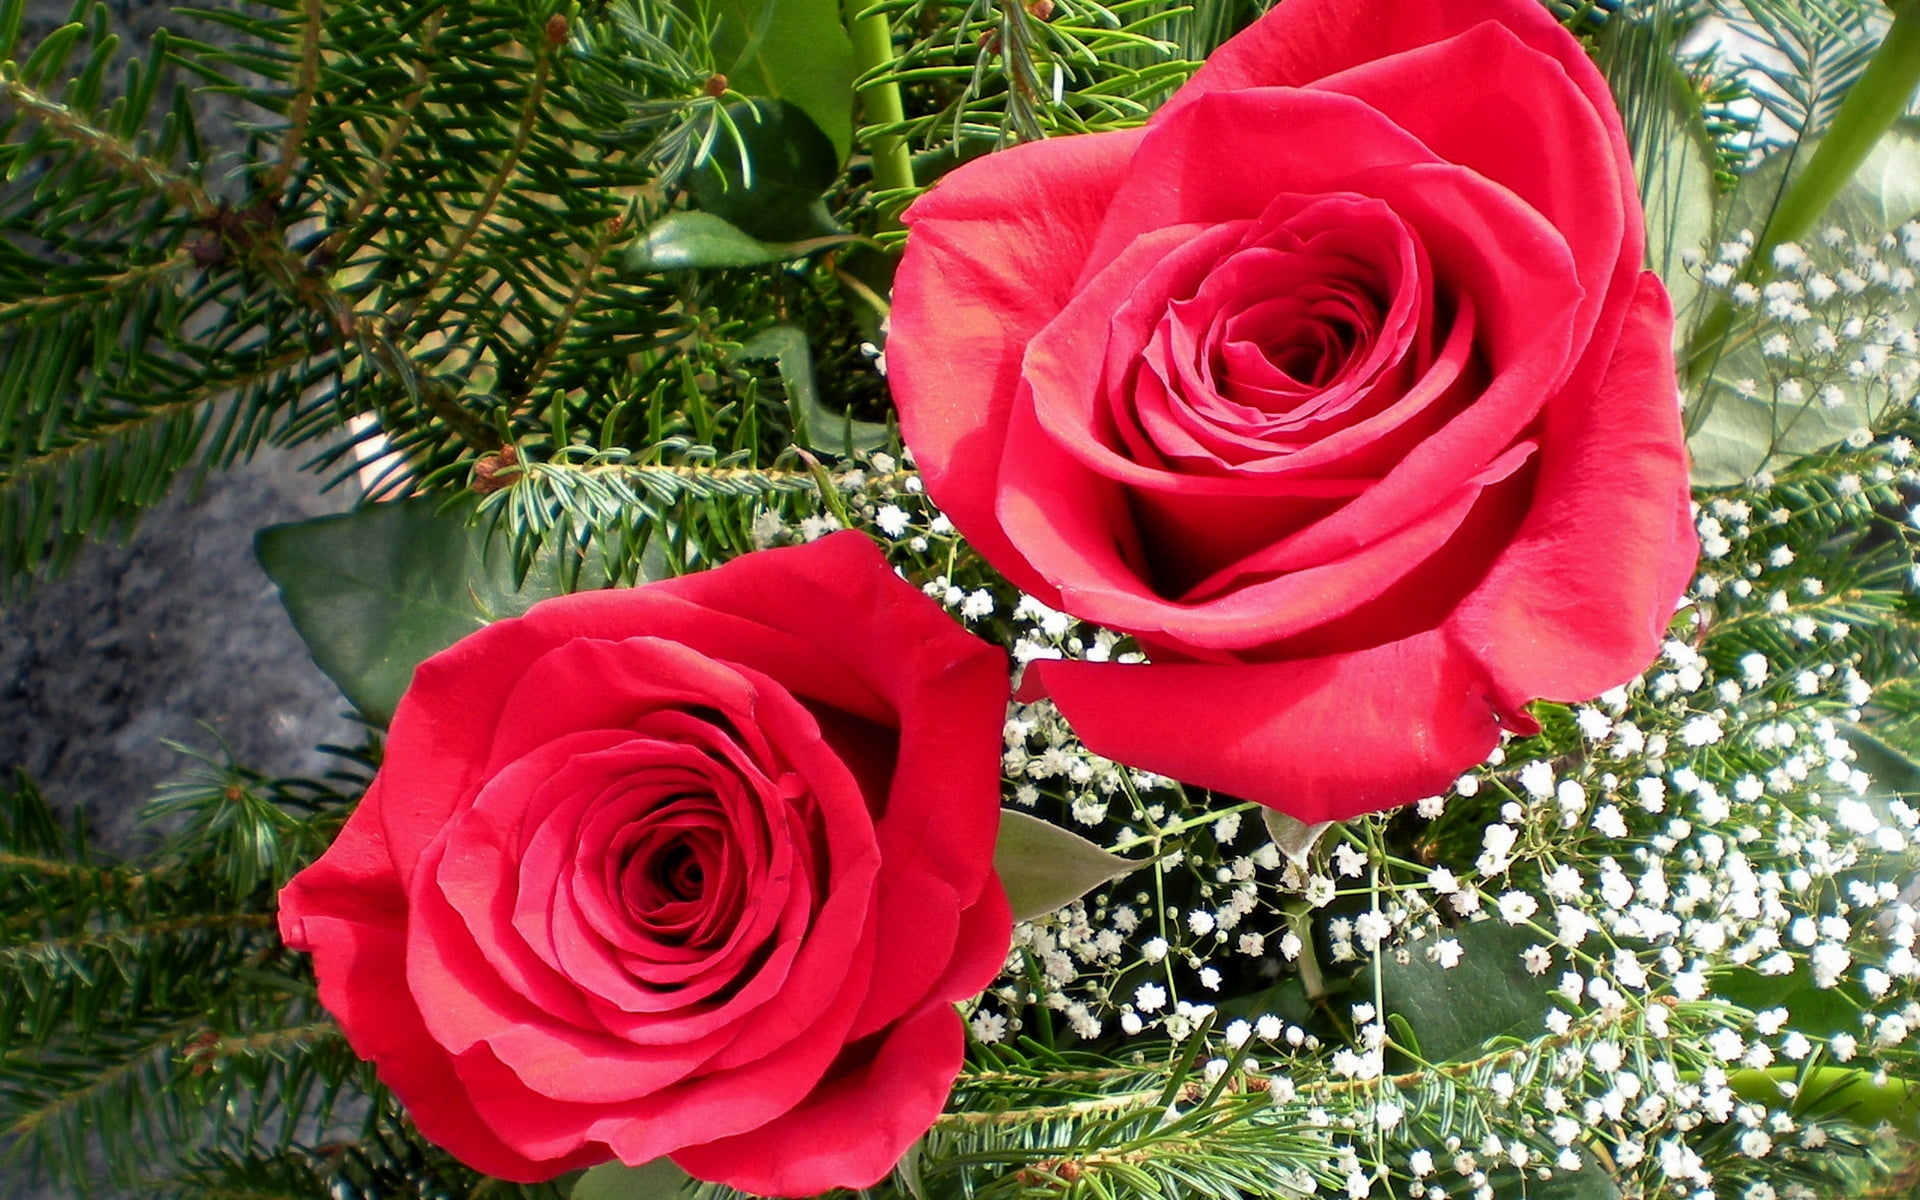 two red roses close-up photo